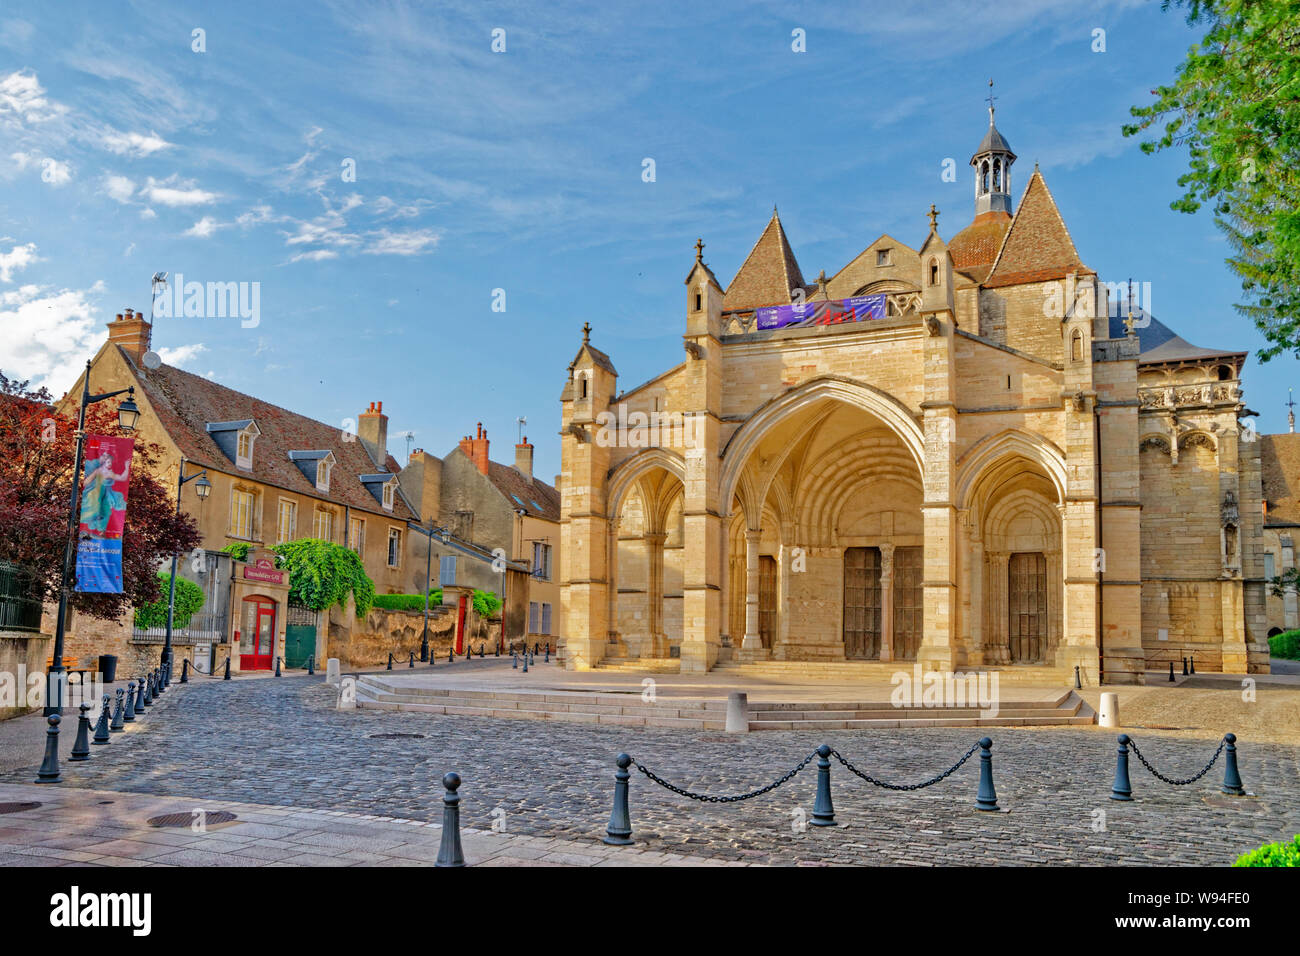 The collegiate church of Notre Dame de Beaune at Beaune, Burgundy, France. Stock Photo